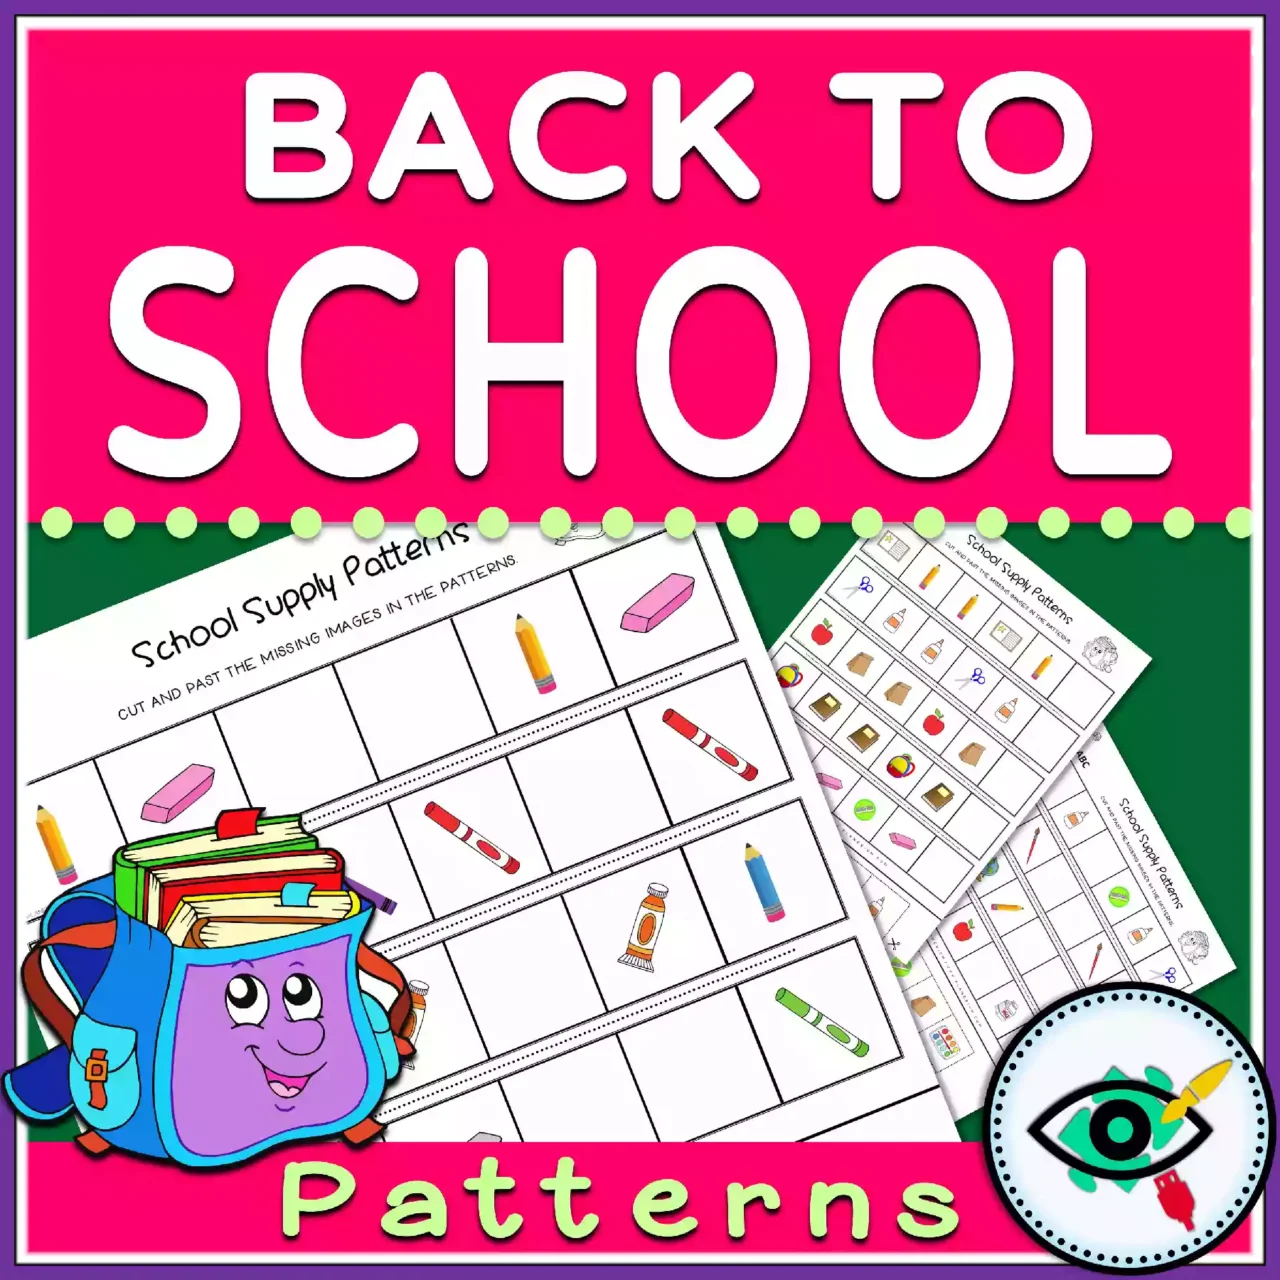 Back to School Patterns - Featured